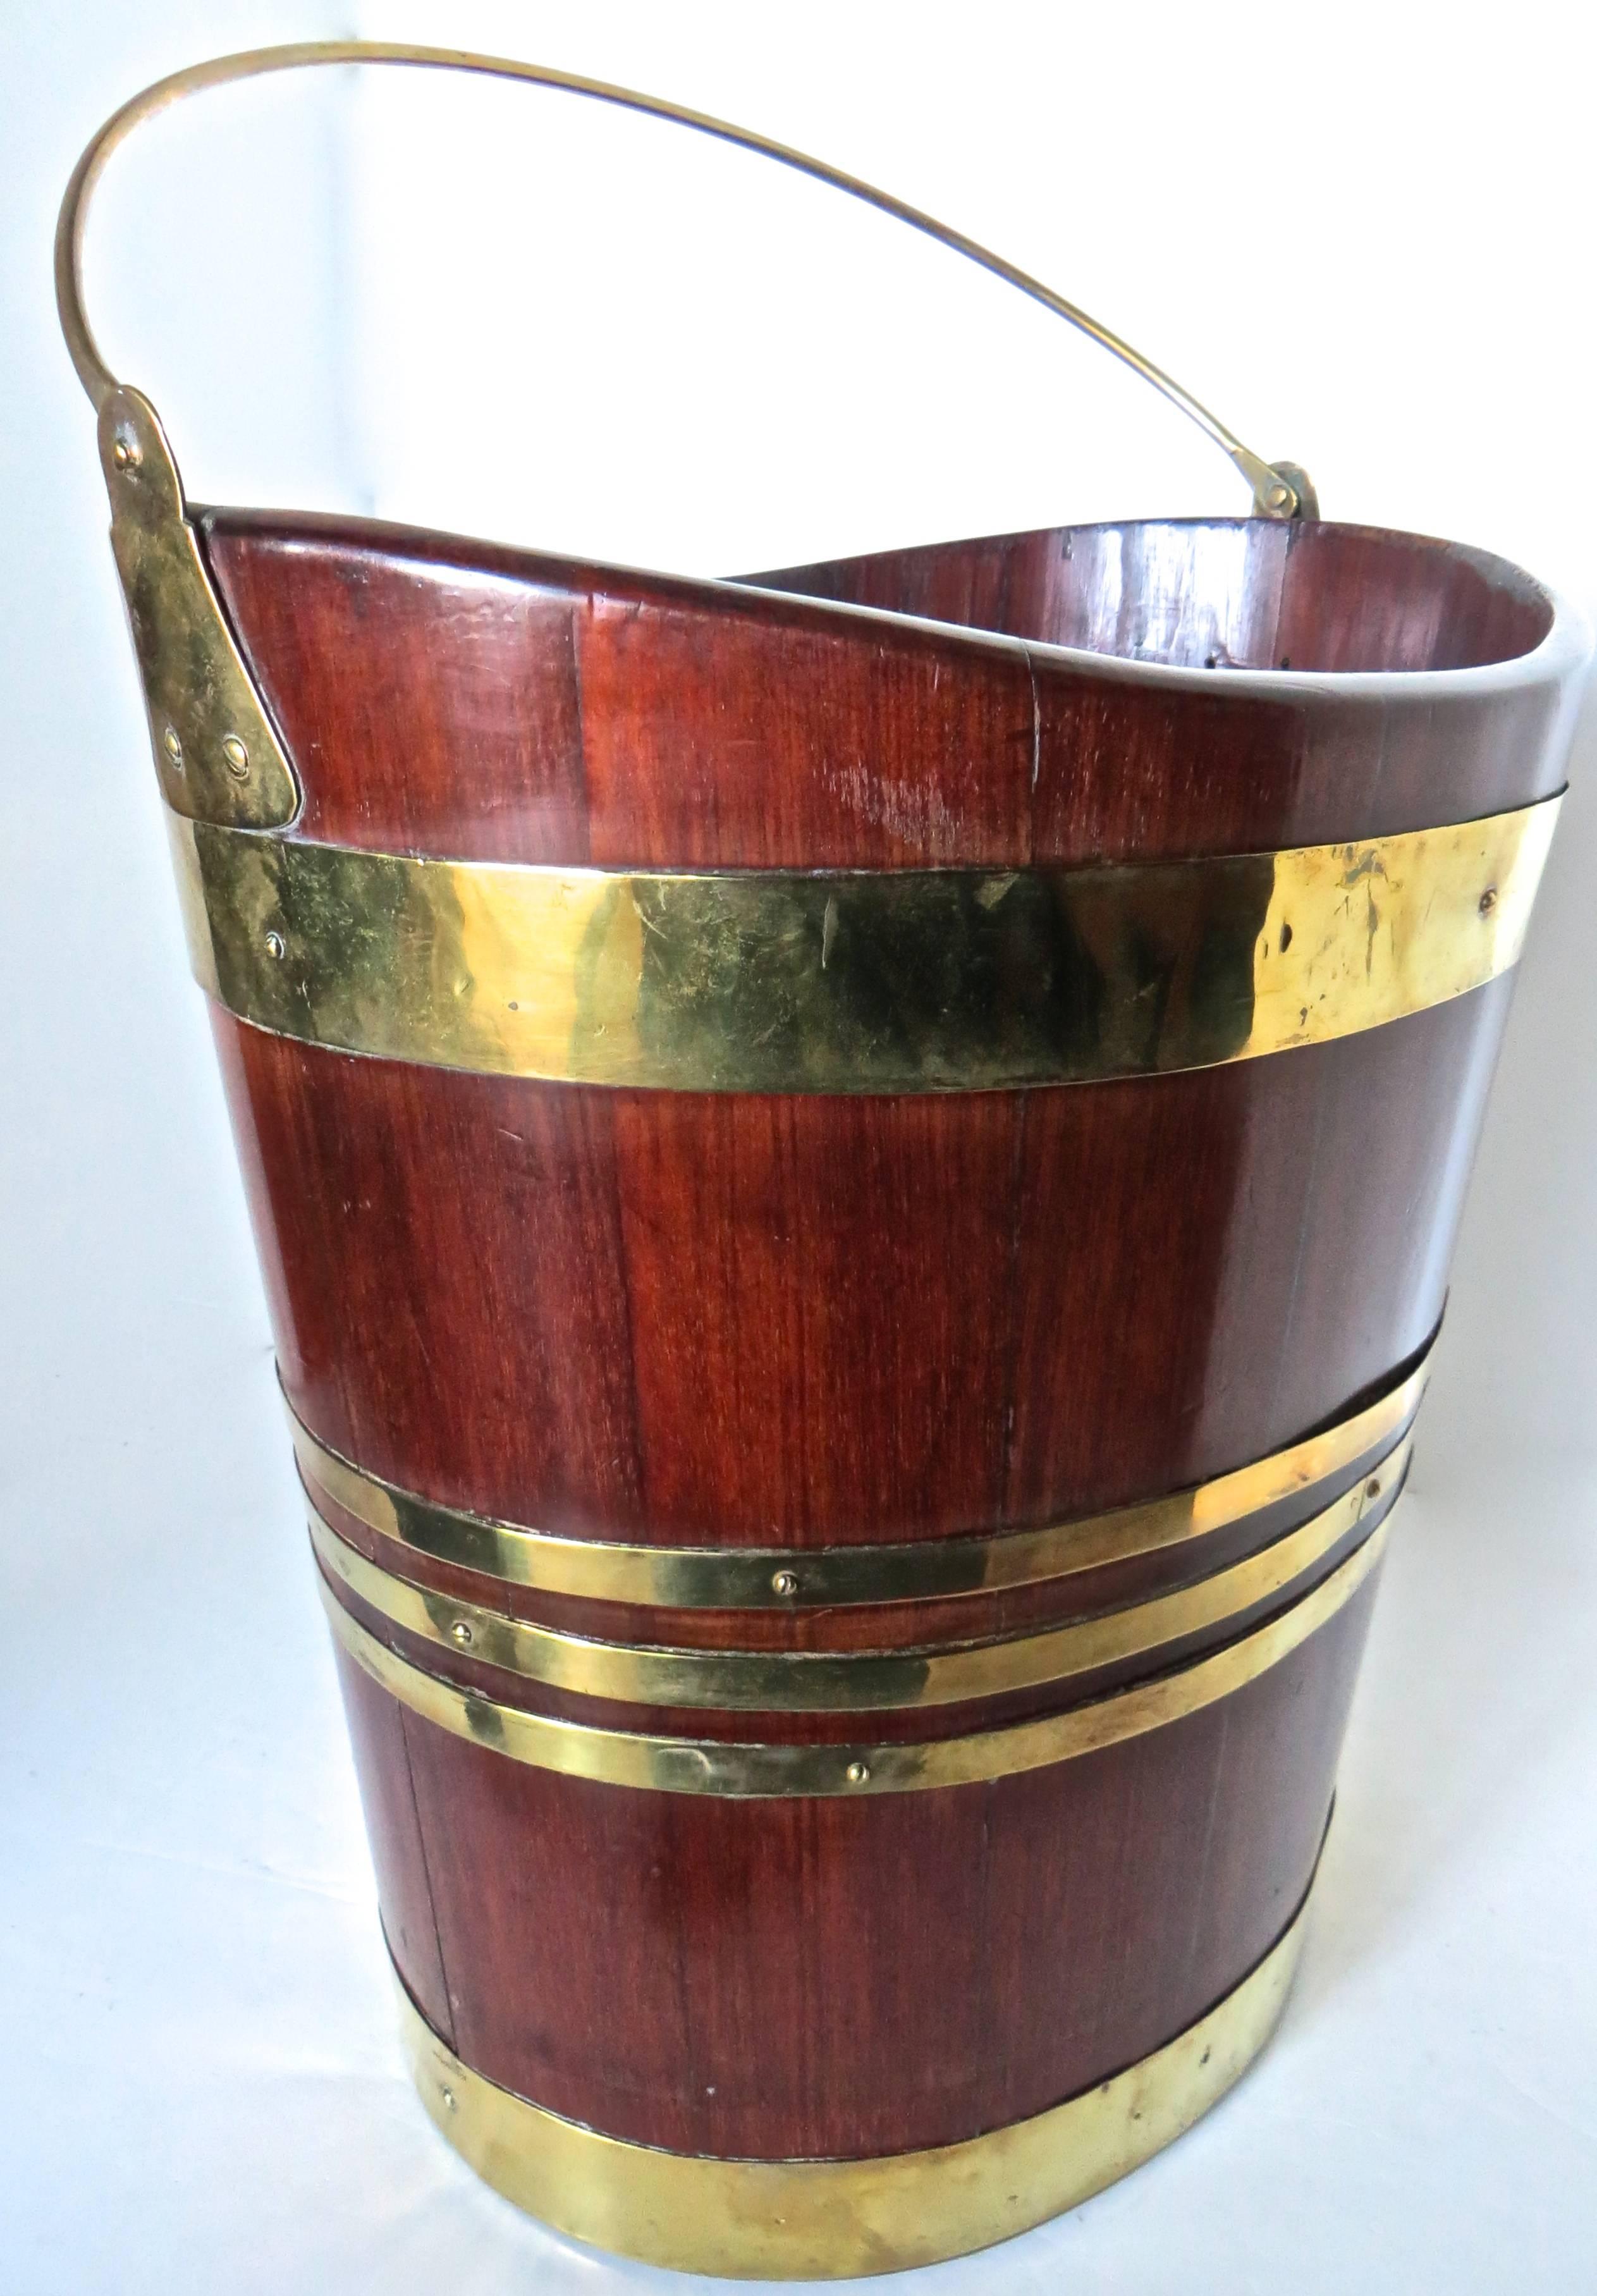 This very attractive British made oval shaped and tapered mahogany peat bucket is elaborately decorated and bound with five brass bands, and is held at the top with the original brass bale, held in place by the original side brass mounts, circa